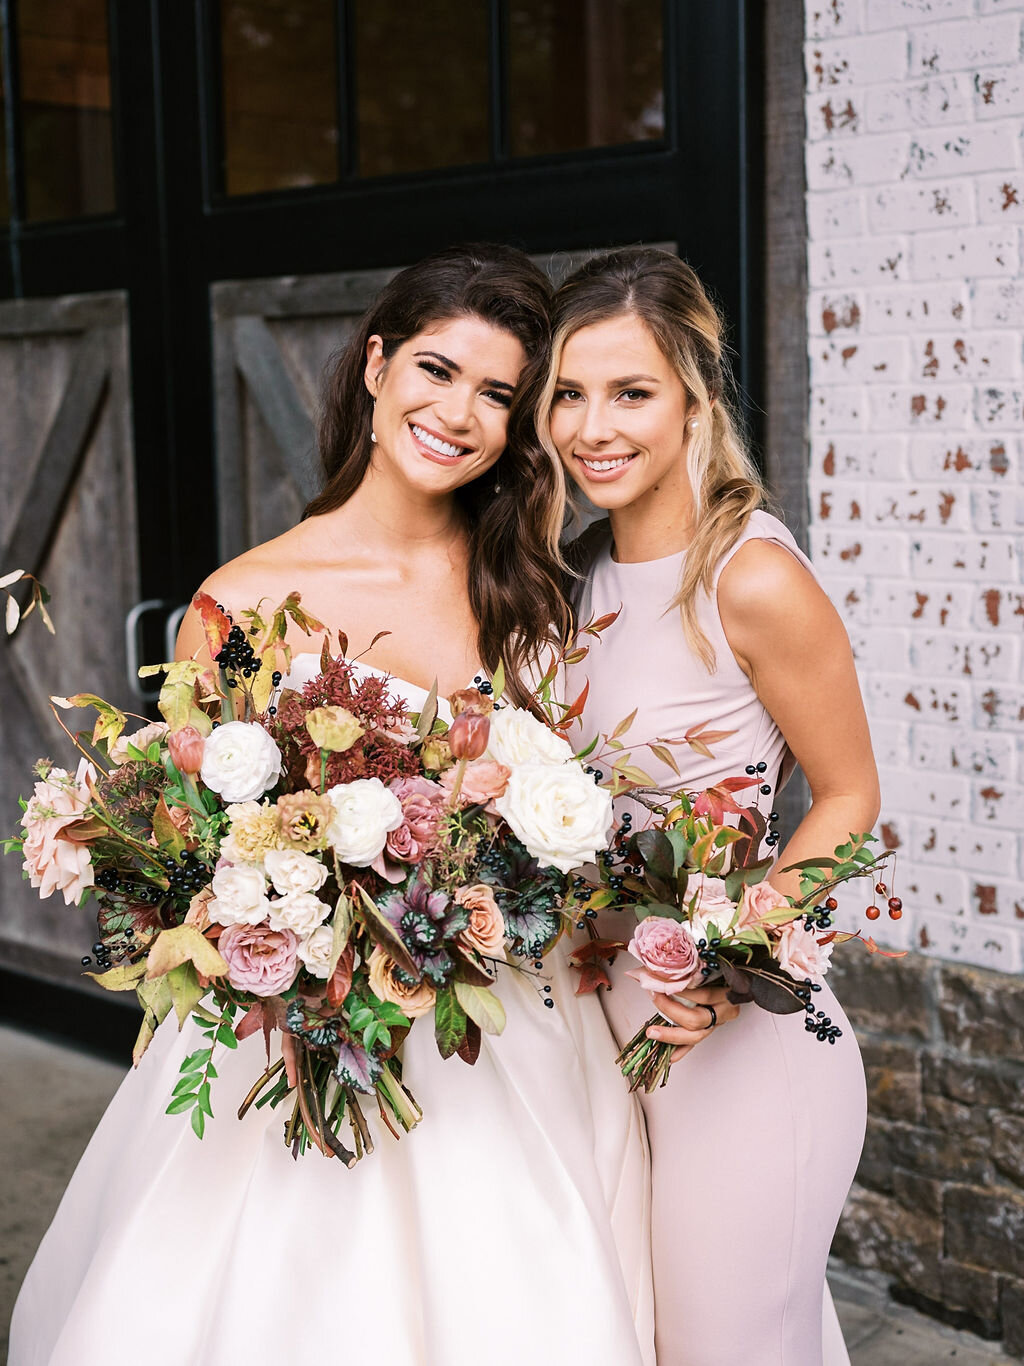 Blush bridesmaid dresses with fall floral bouquets of garden roses, ranunculus, berries, and fall leaves and greenery. Nashville wedding florist at Trinity View Farm.